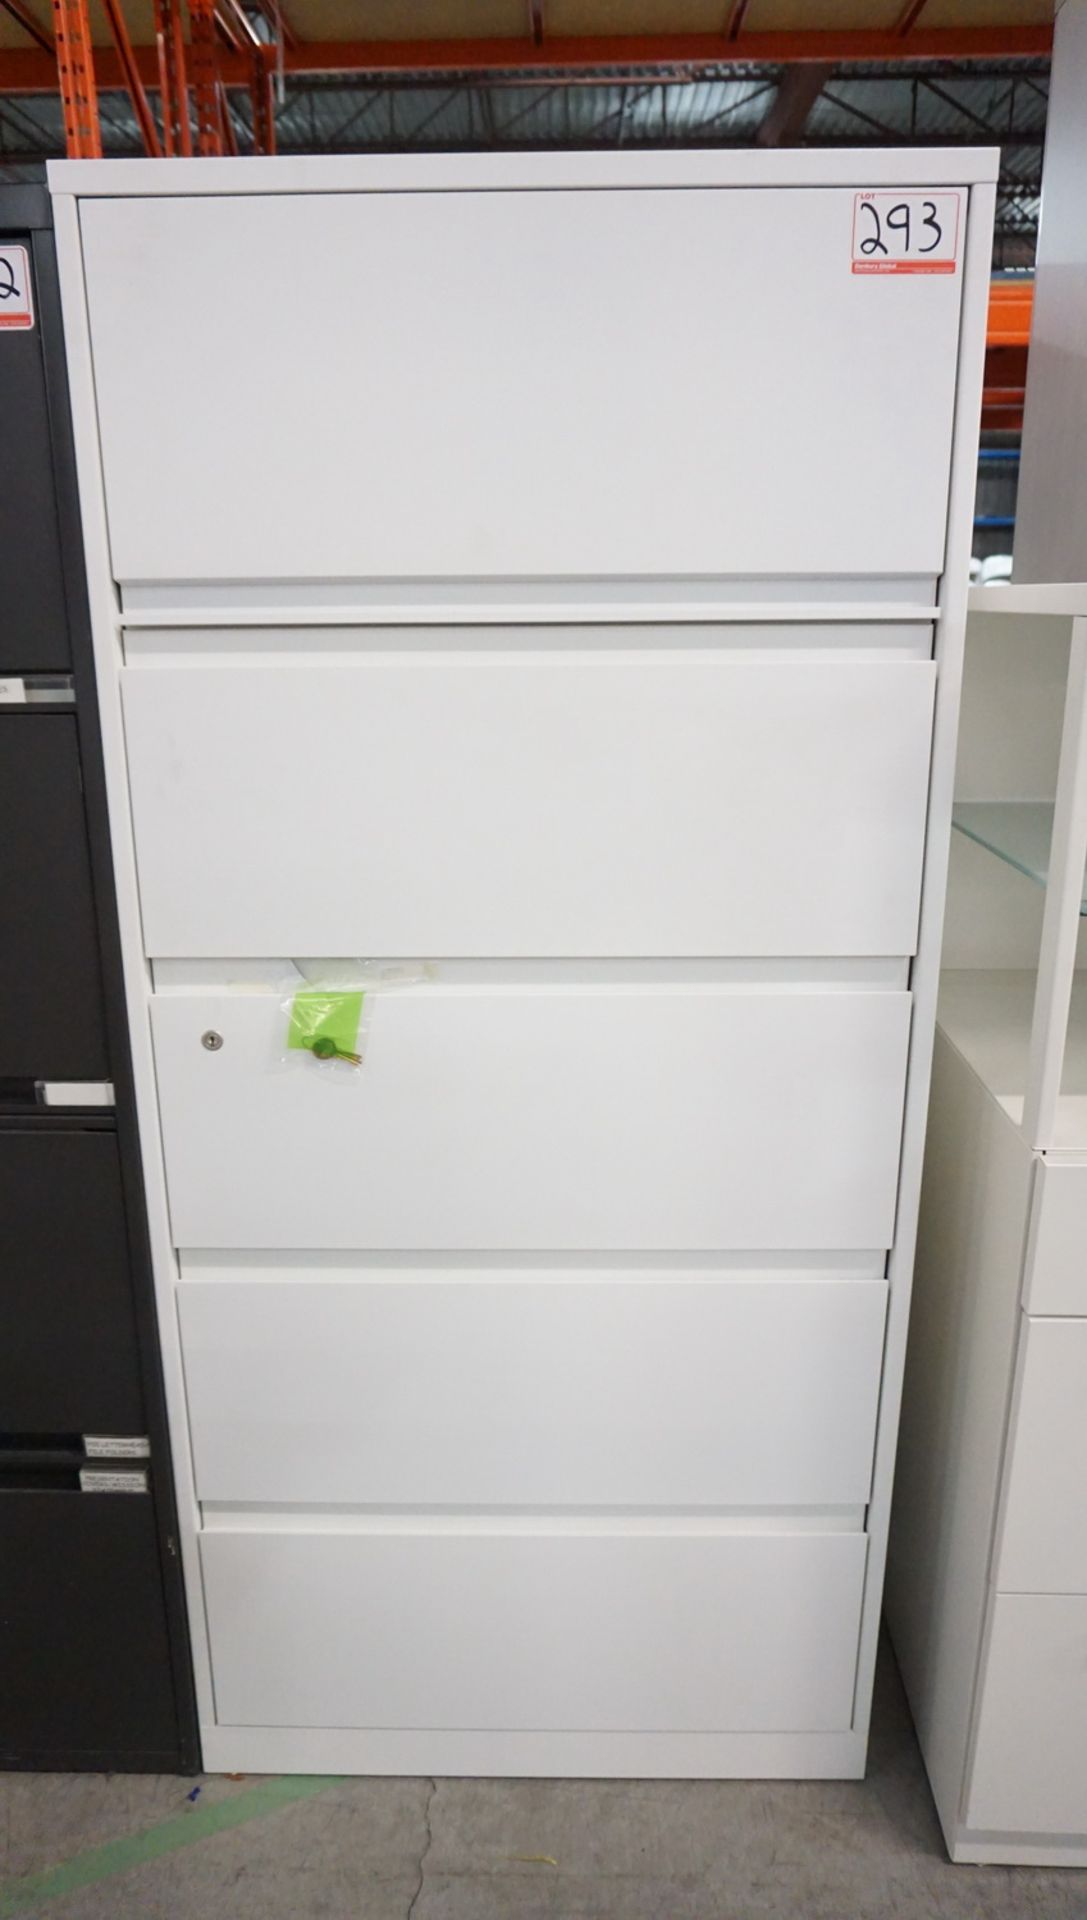 WHITE STEEL 5-DR 30 X 18 X 65.5" LATERAL FILE CABINET